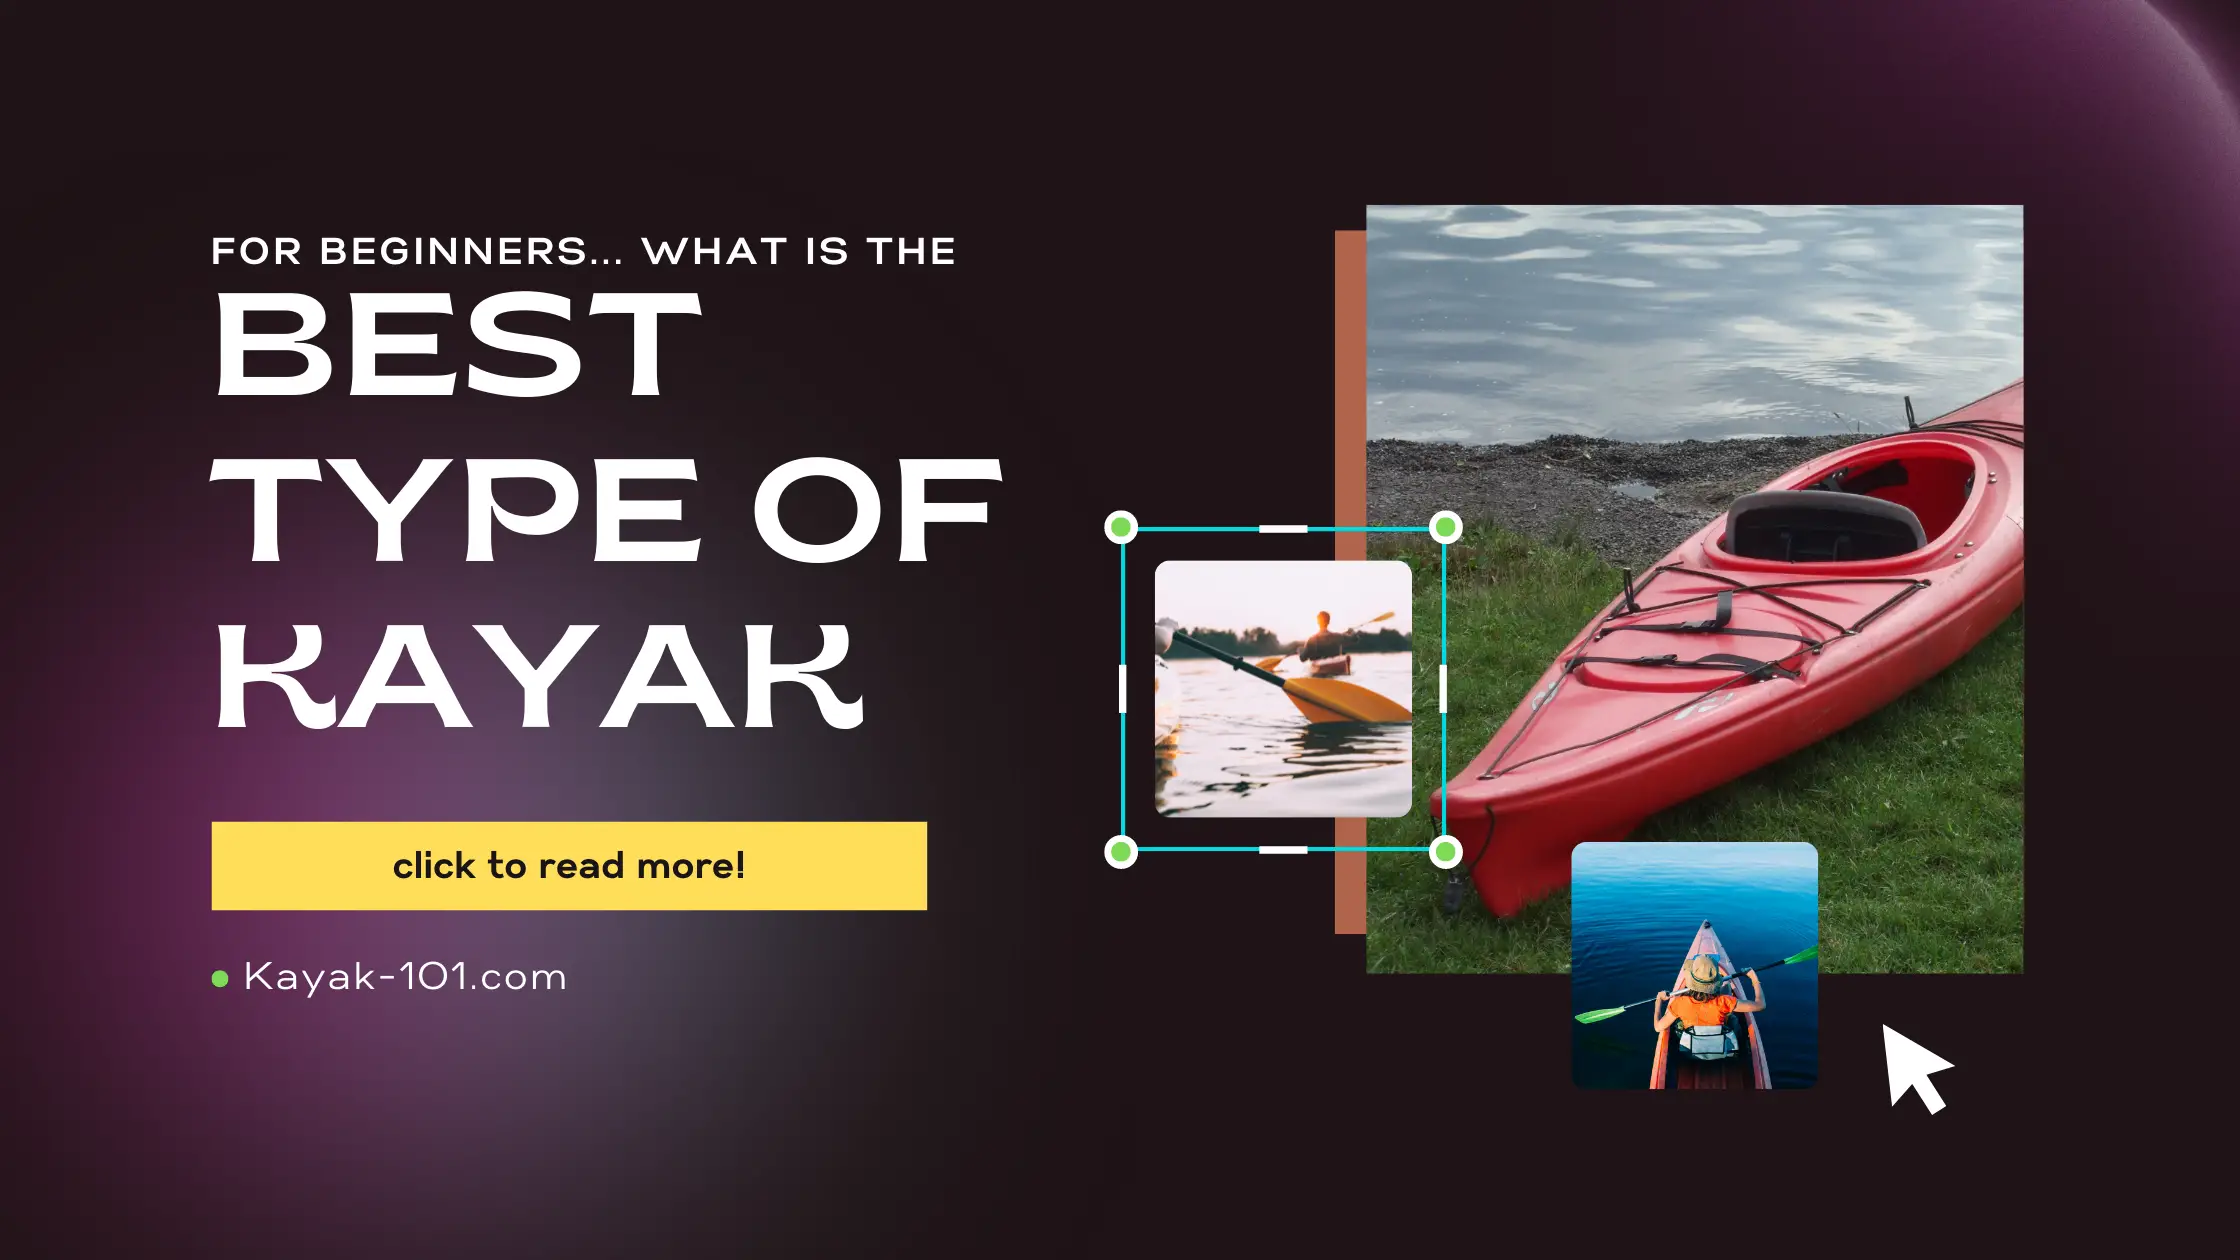 what is the best type of kayak for beginners